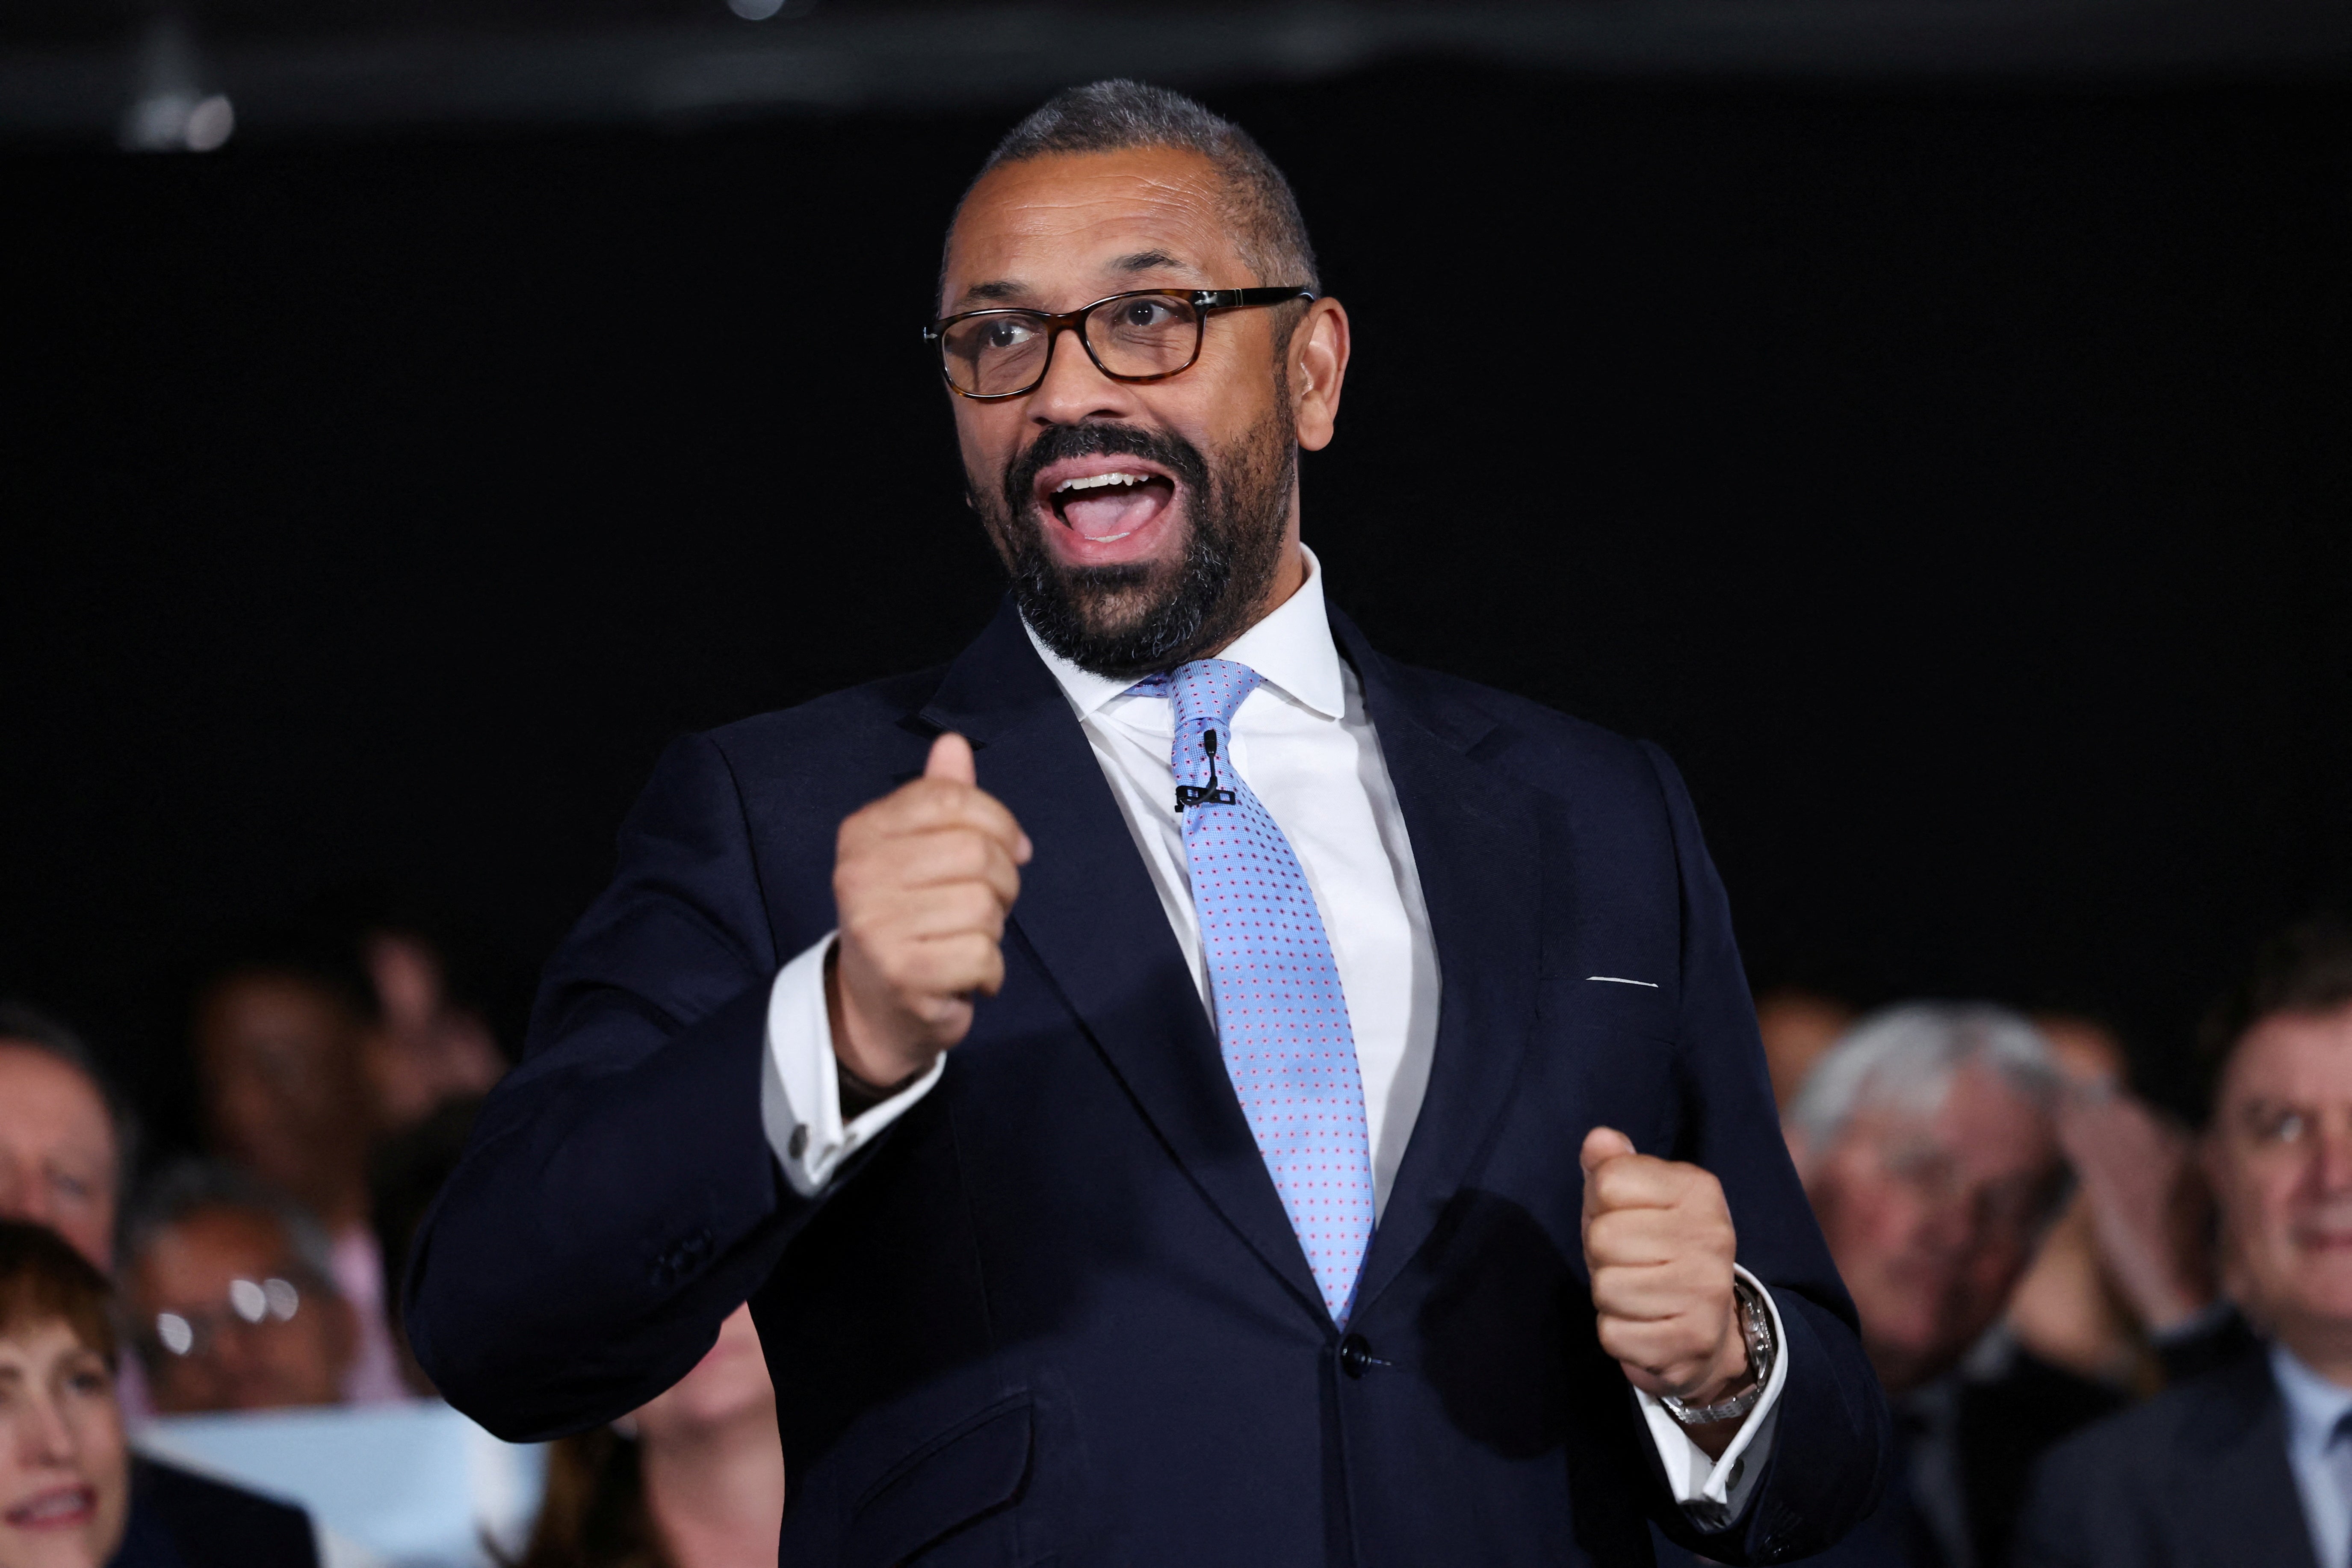 James Cleverly opens the Conservative Party rally